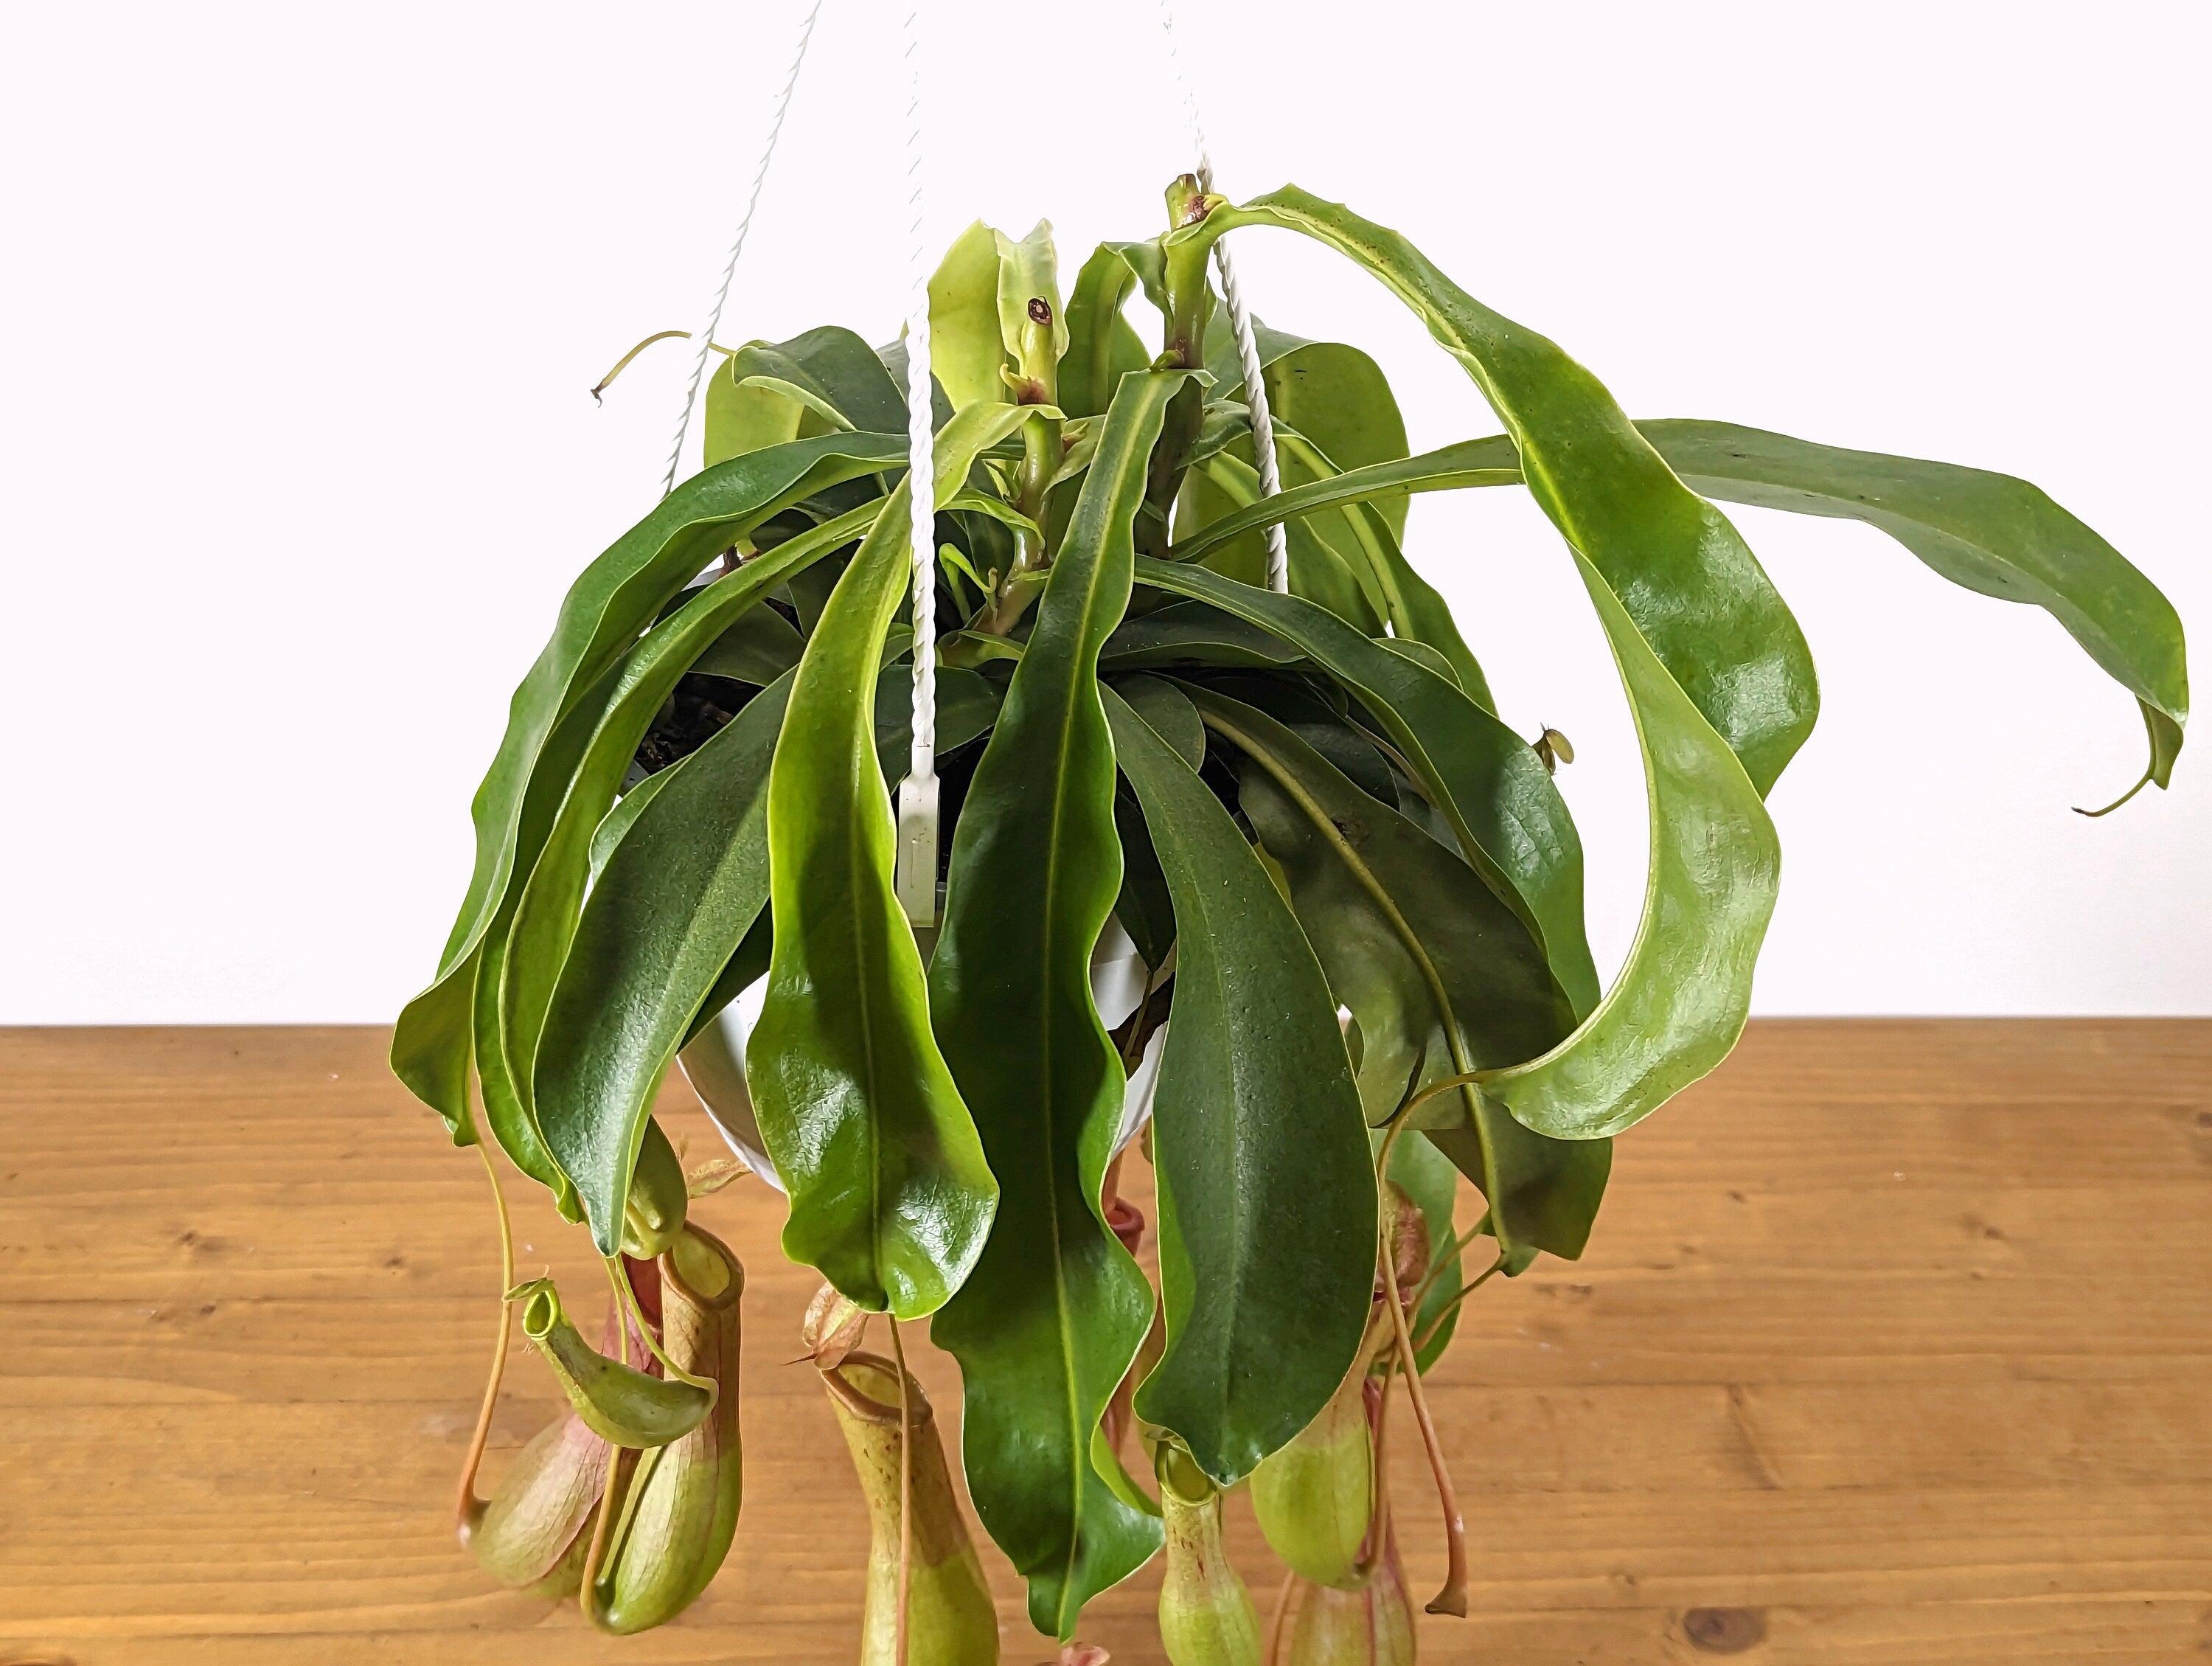 Nepenthes Alata 6 inch Hanging basket pot Live Tropical Plant